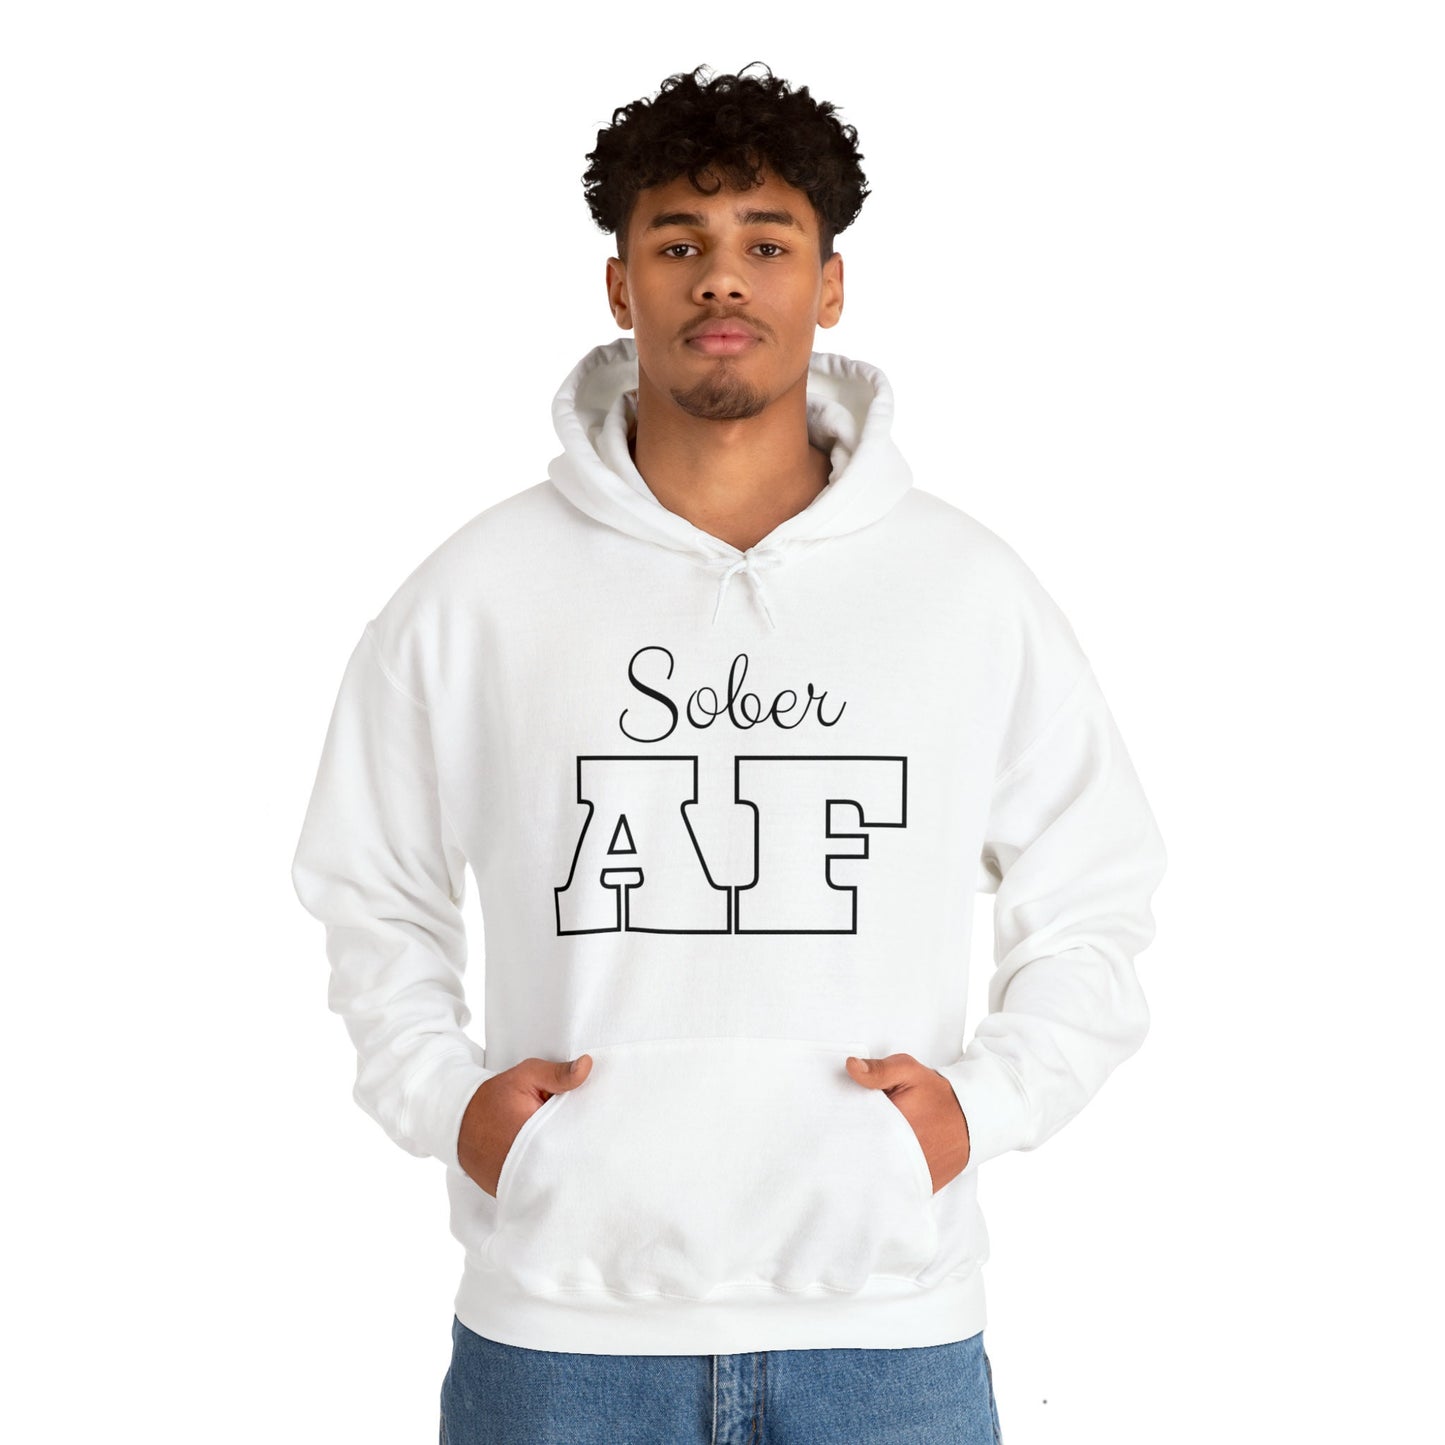 Sober AF Hoodie, Sobriety Pullover, Recovery Hooded Sweatshirt, Recovery Celebration Apparel, AA Shirts, Alcoholic Anonymous Sweatshirt - Male Model